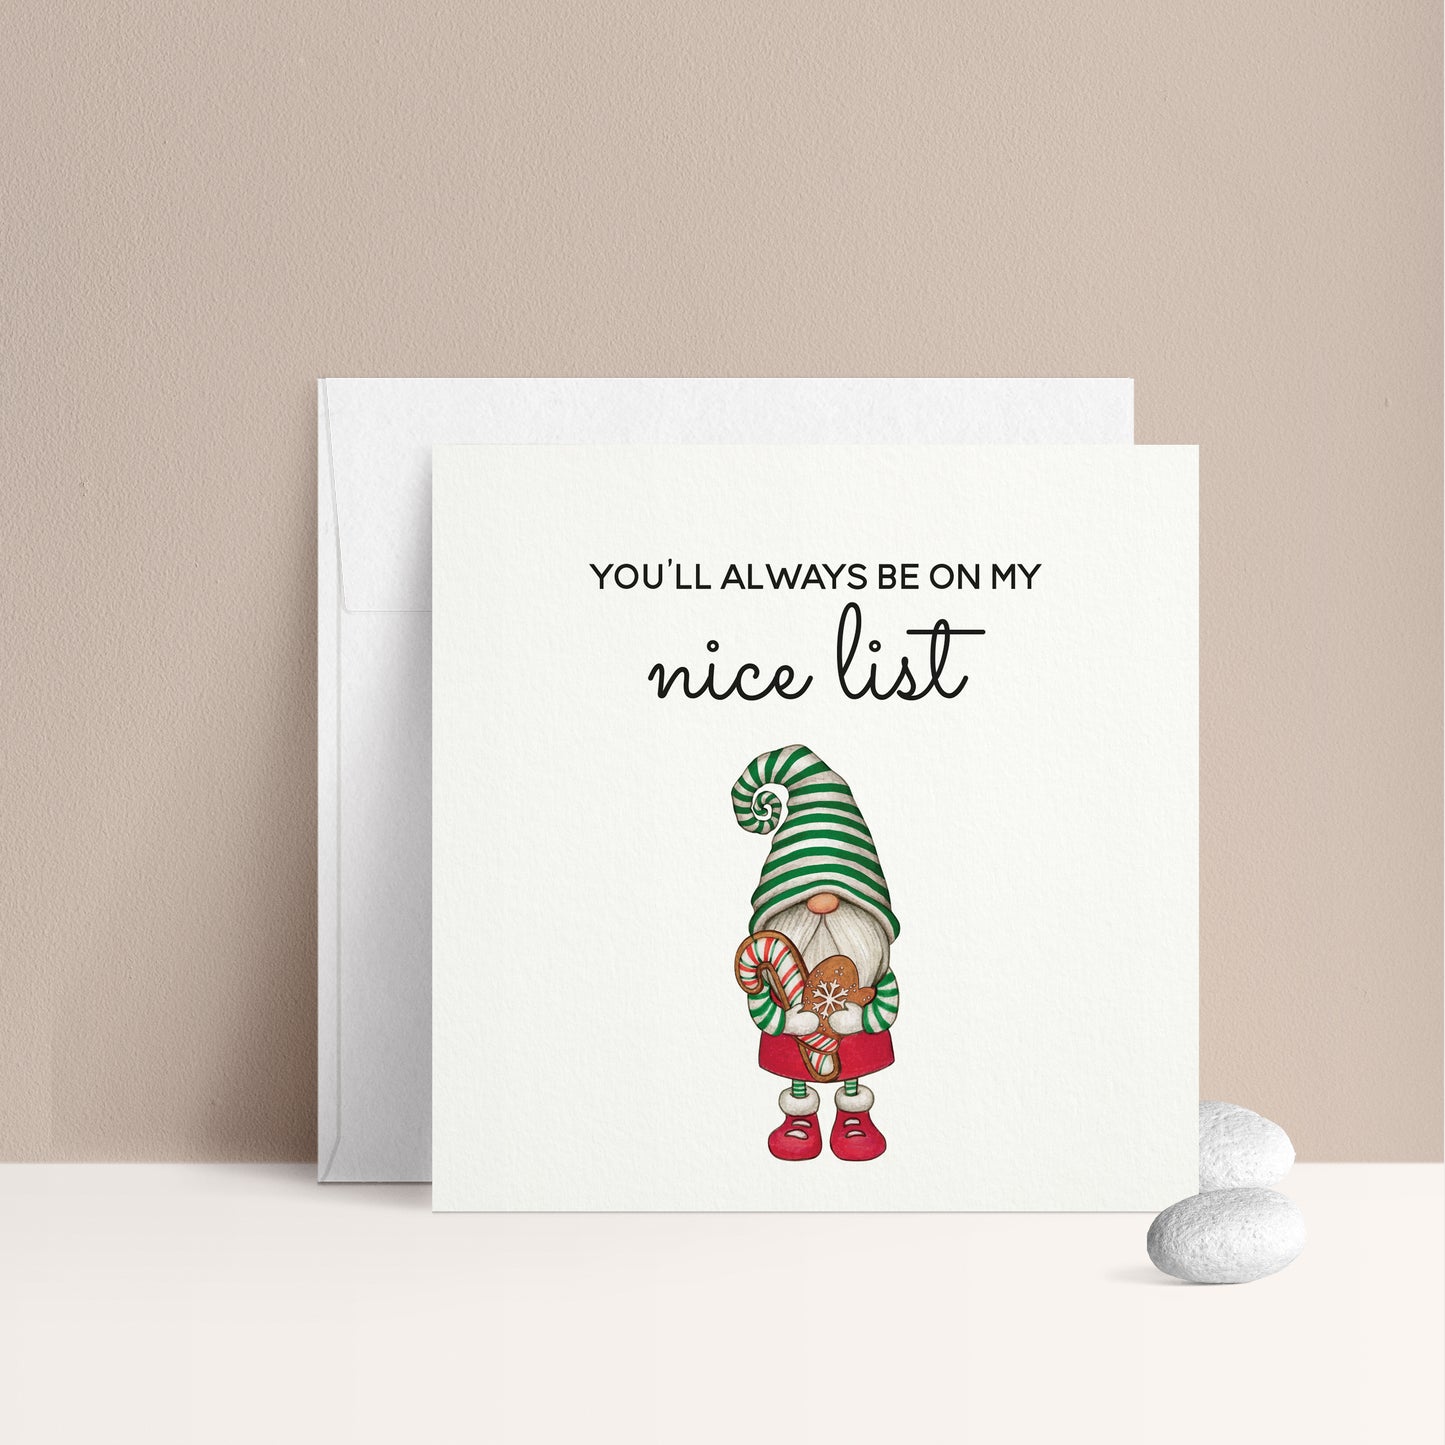 you'll always be on my nice list christmas greeting card - XOXOKristen